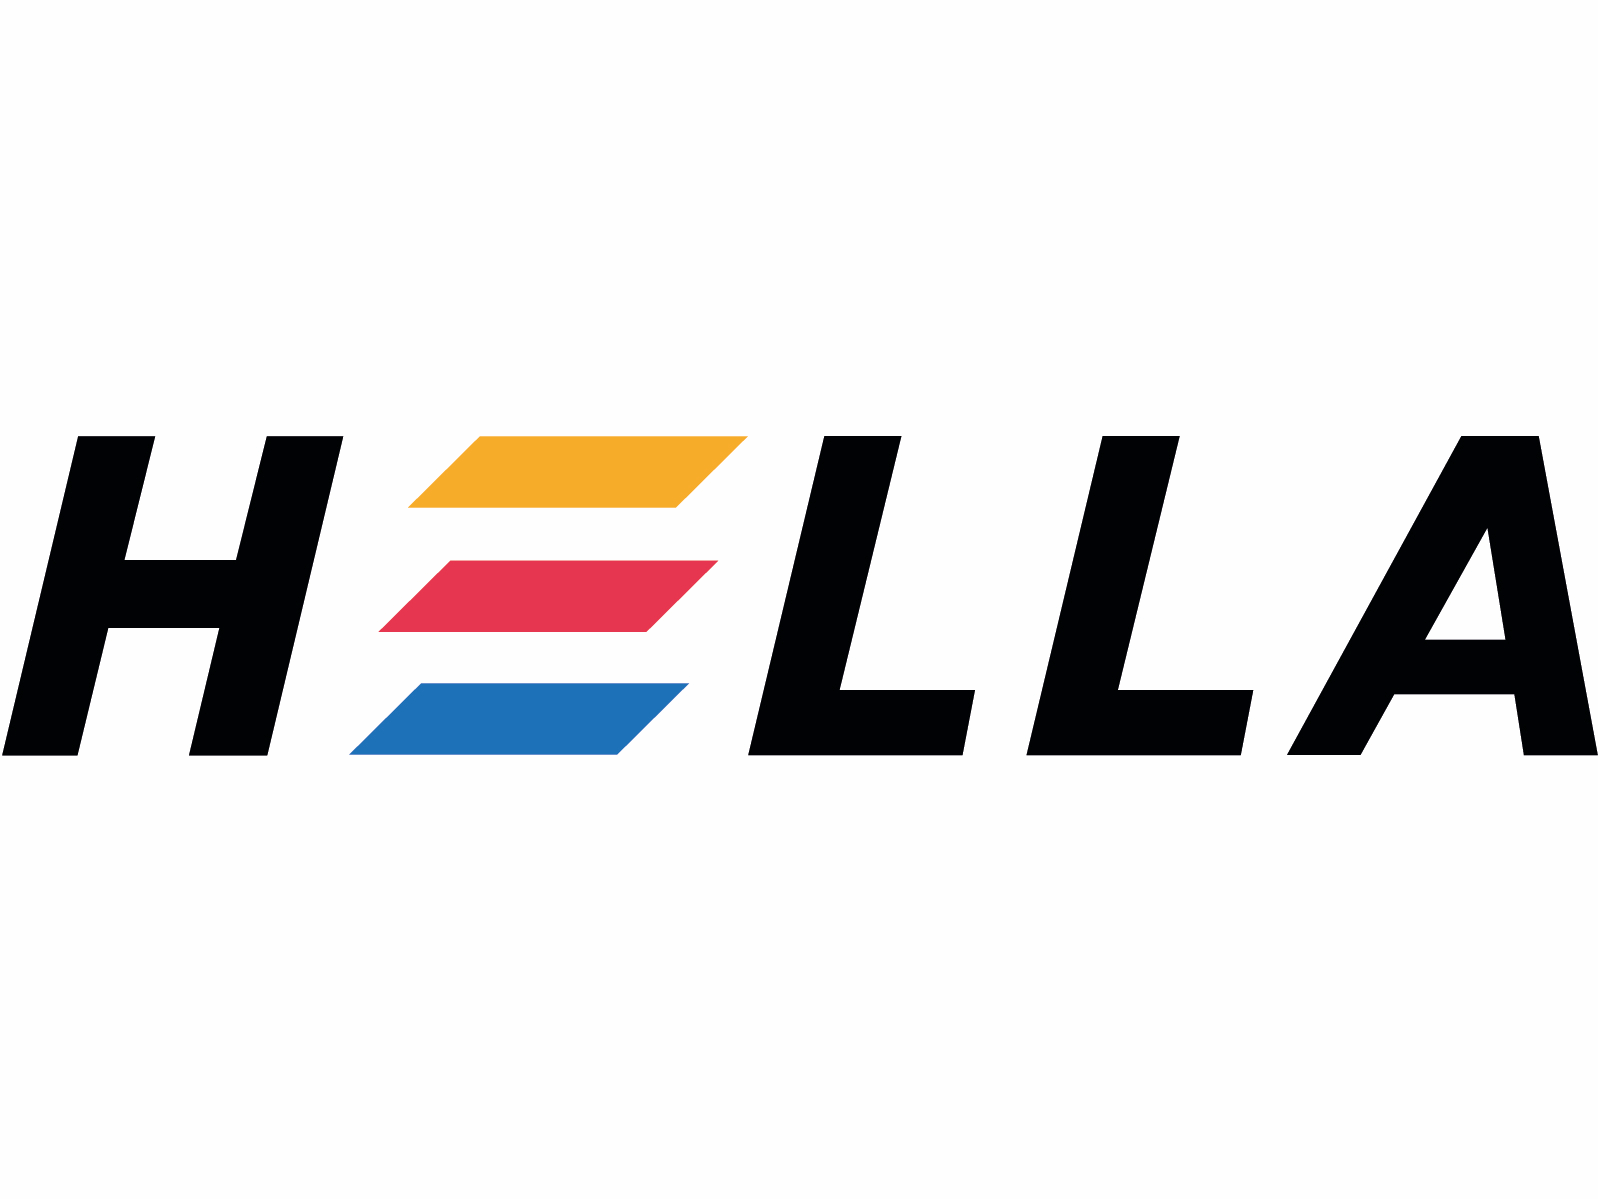 Hella Logo - HELLA | About | Archiproducts